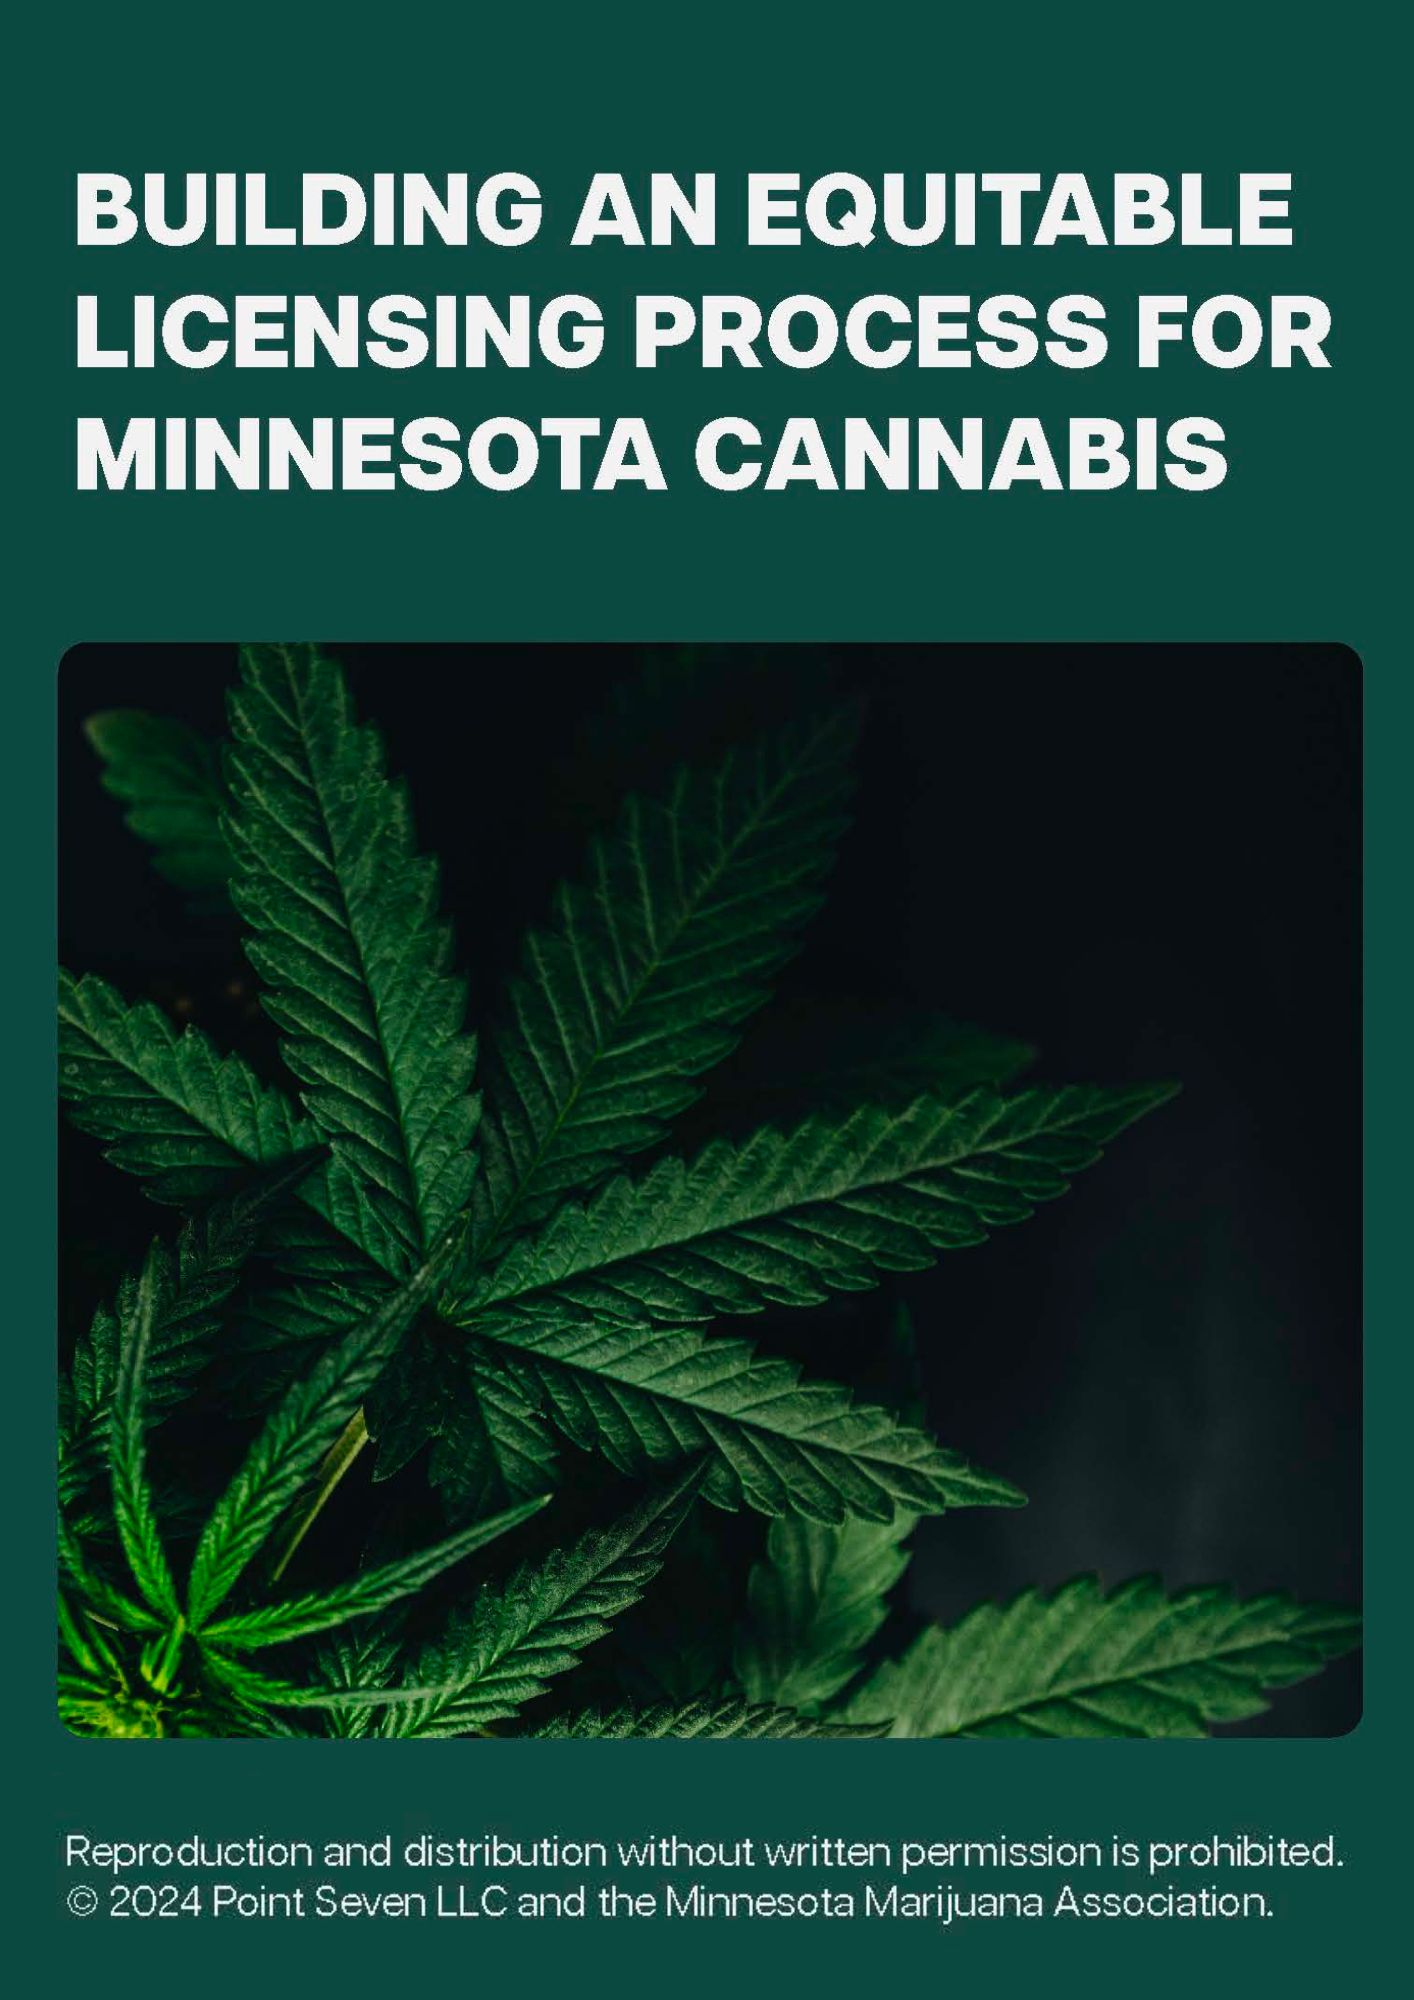 Cannabis Resource - Building an Equitable Licensing Process for Minnesota Cannabis